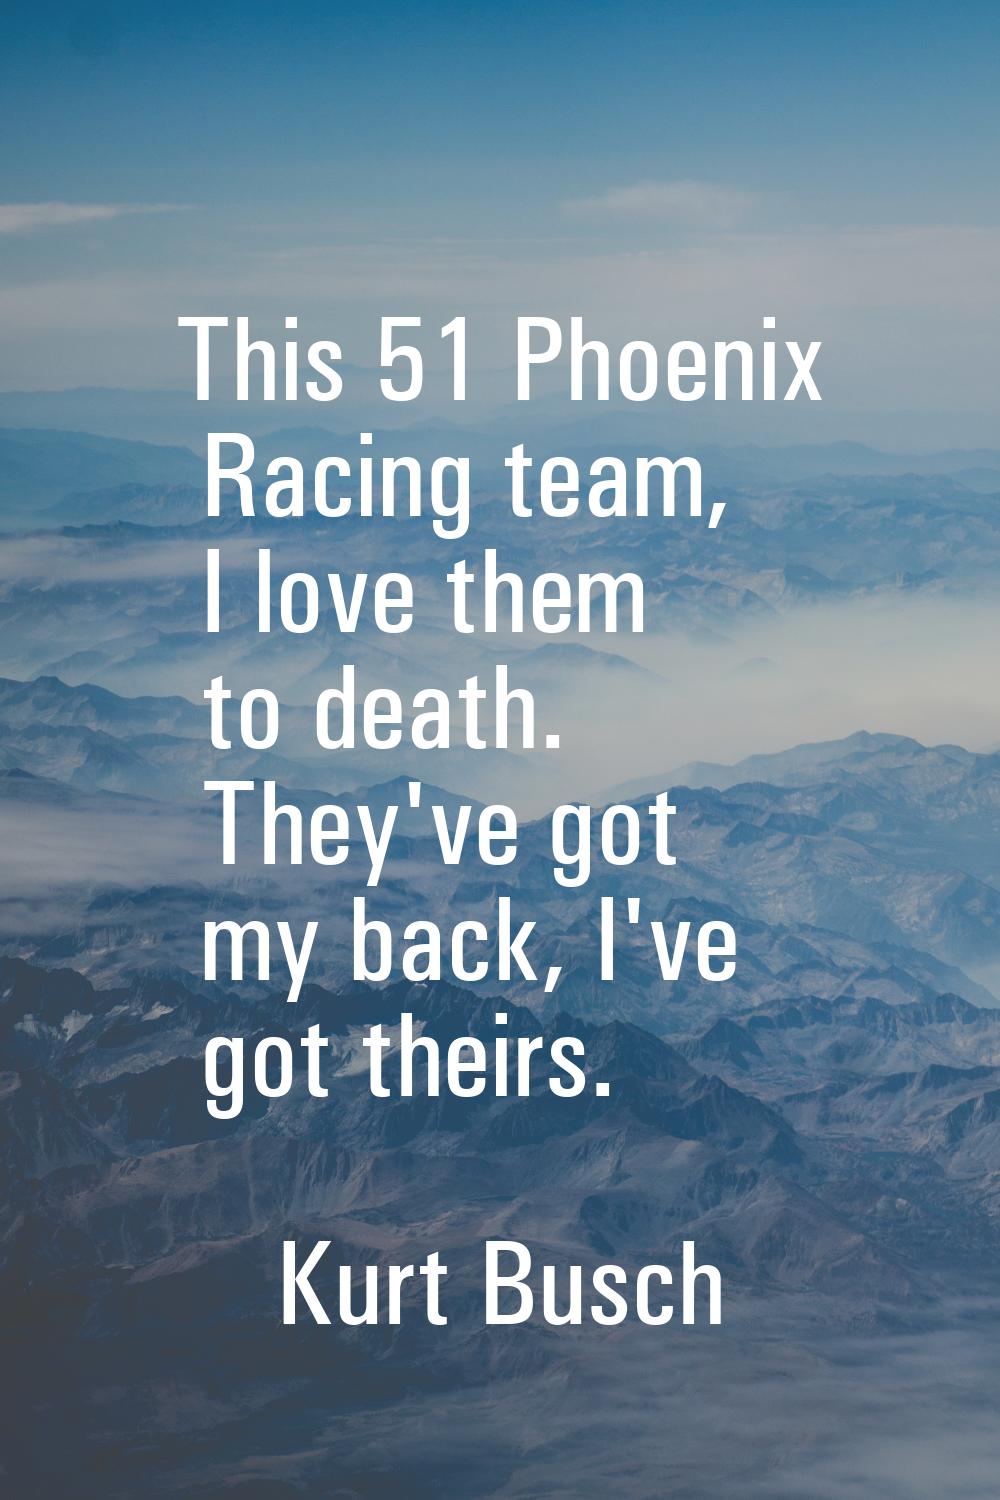 This 51 Phoenix Racing team, I love them to death. They've got my back, I've got theirs.